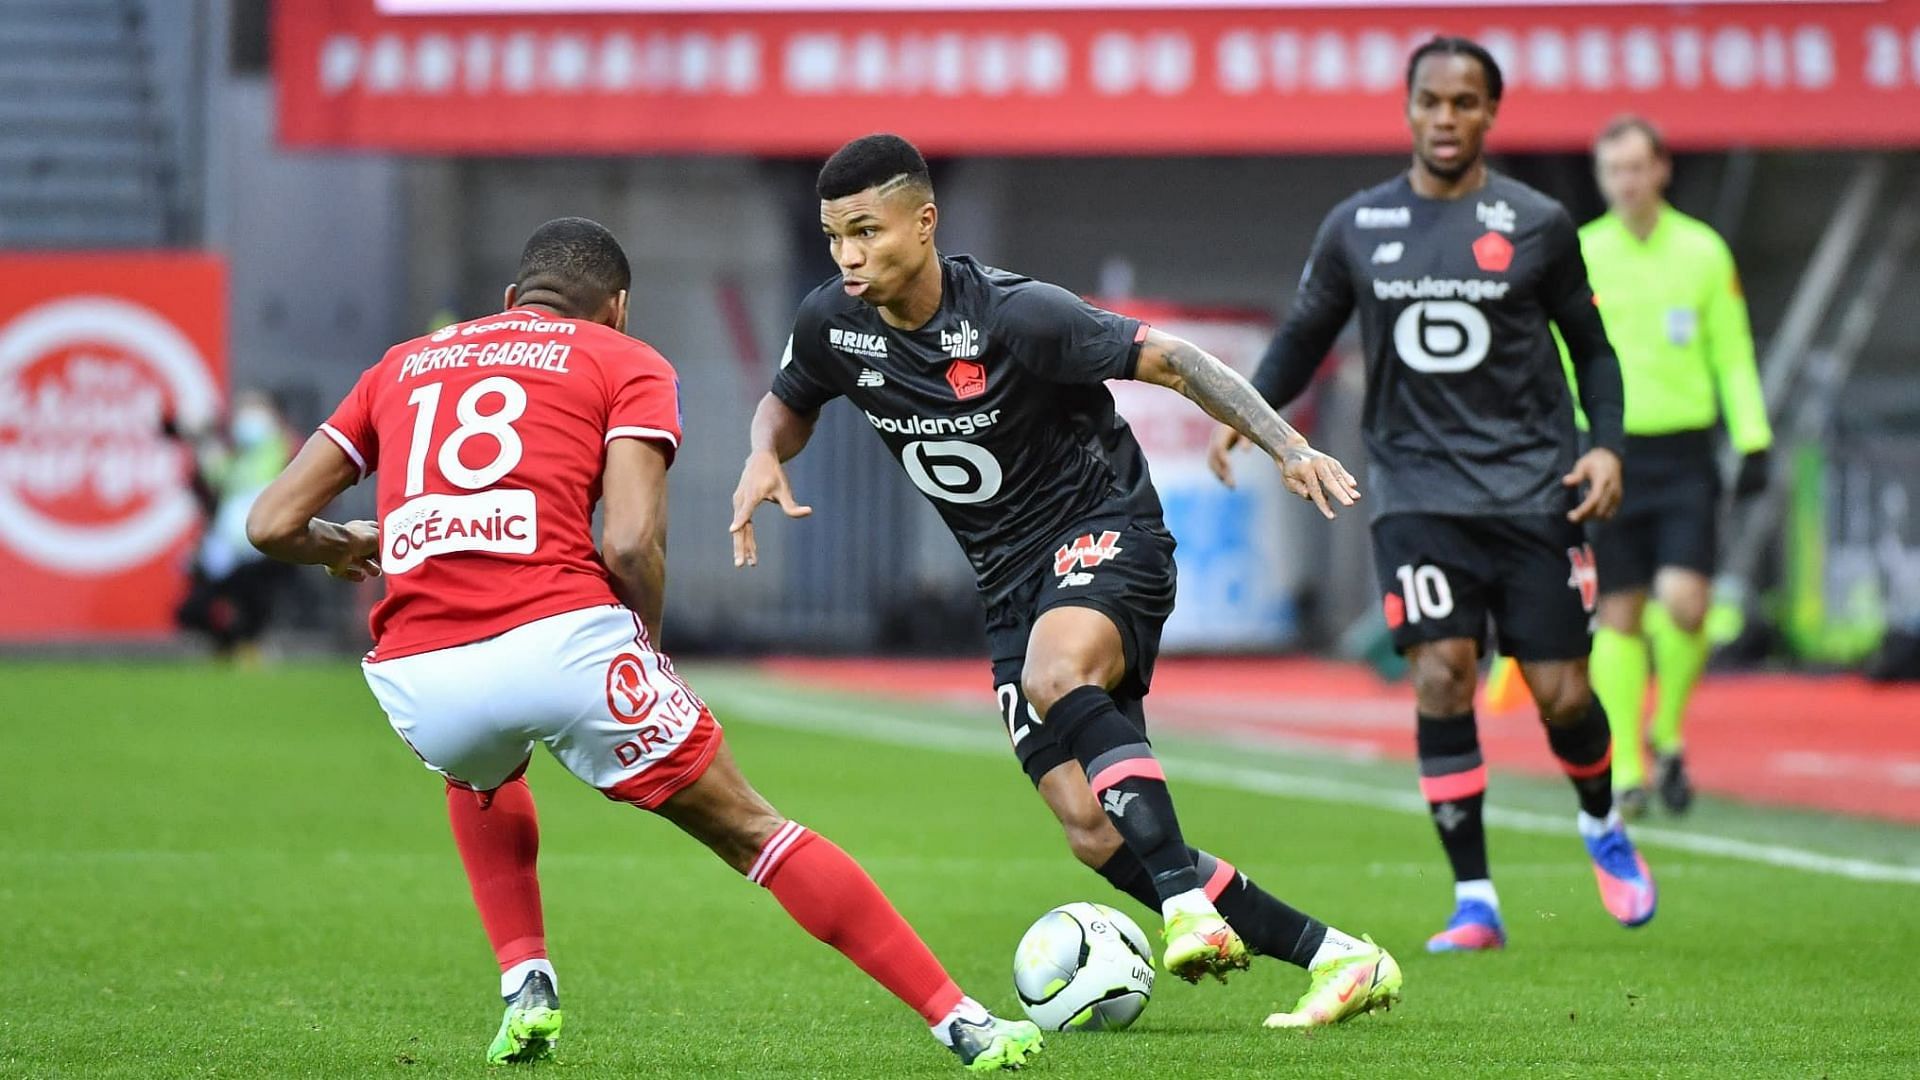 Lille and Brest will meet in Ligue 1 on Friday